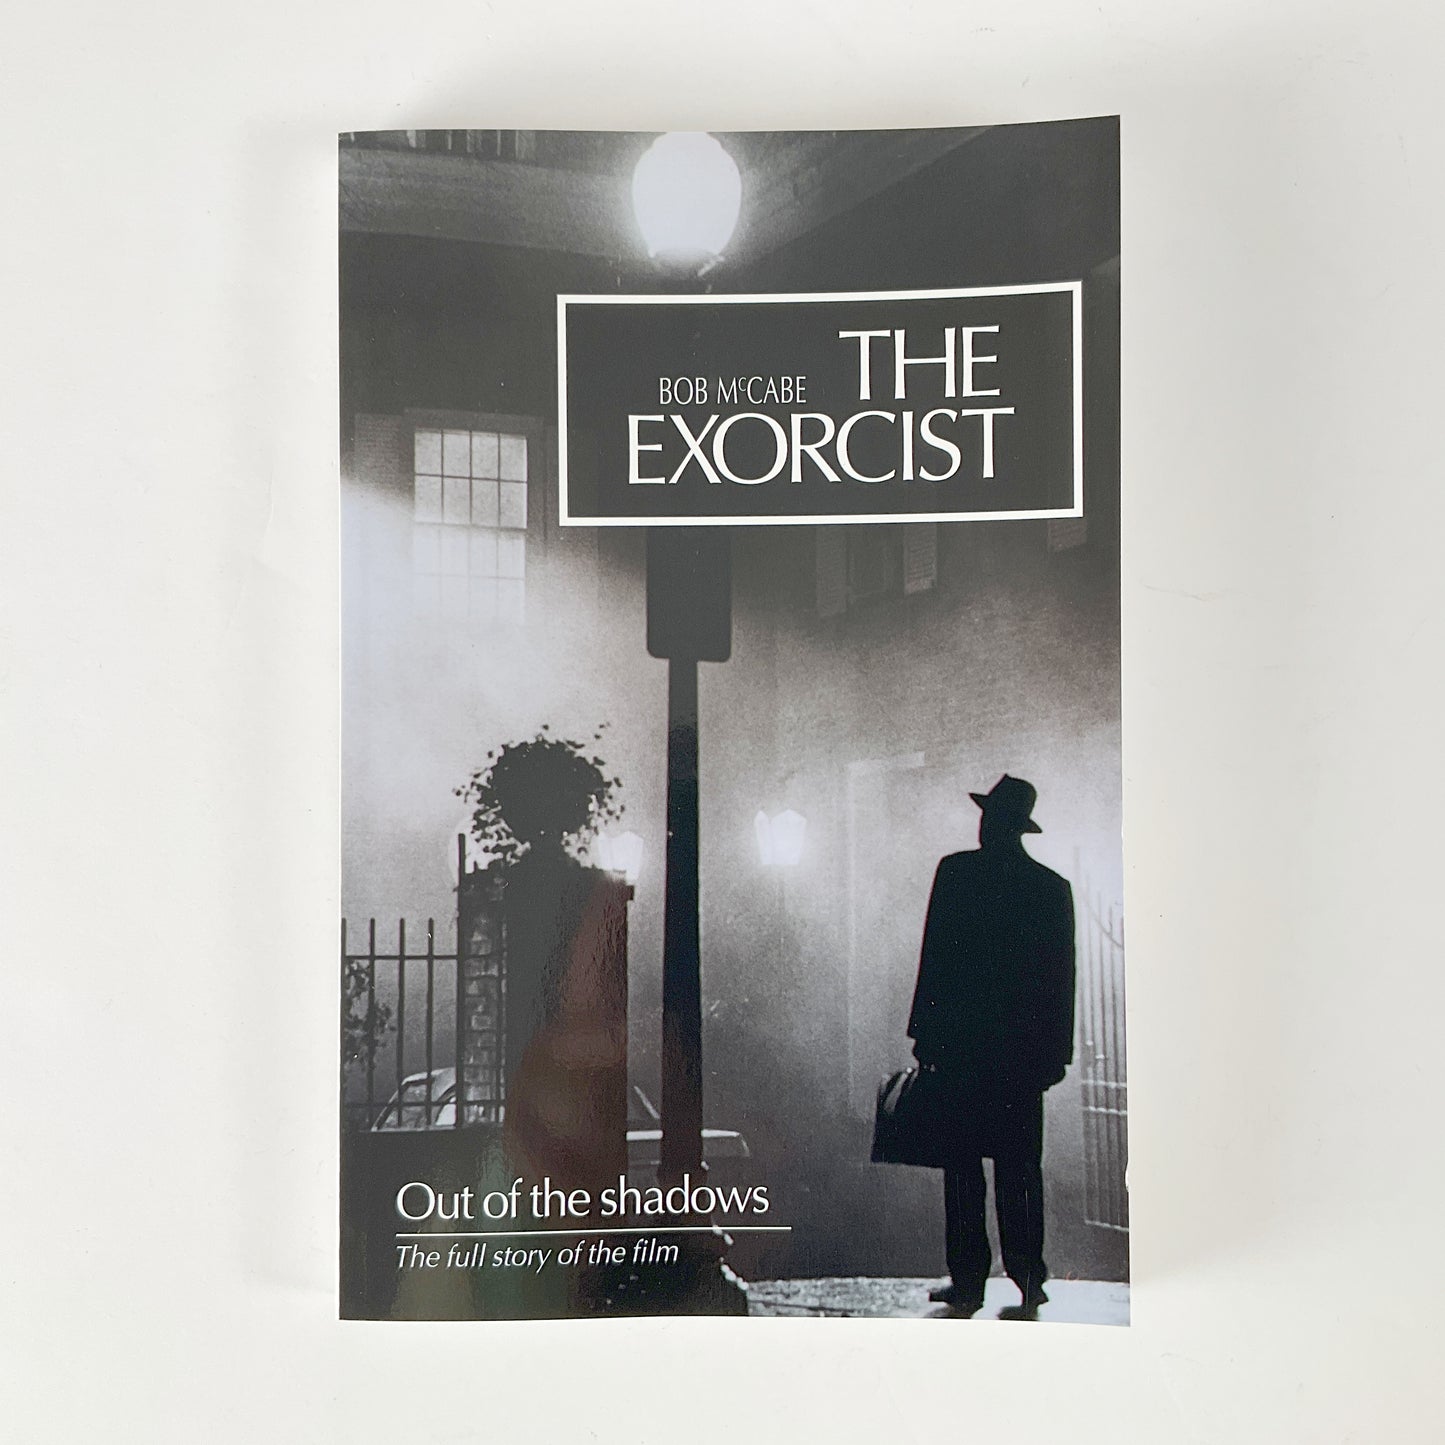 The Exorcist - Special Edition Widescreen Box Set VHS